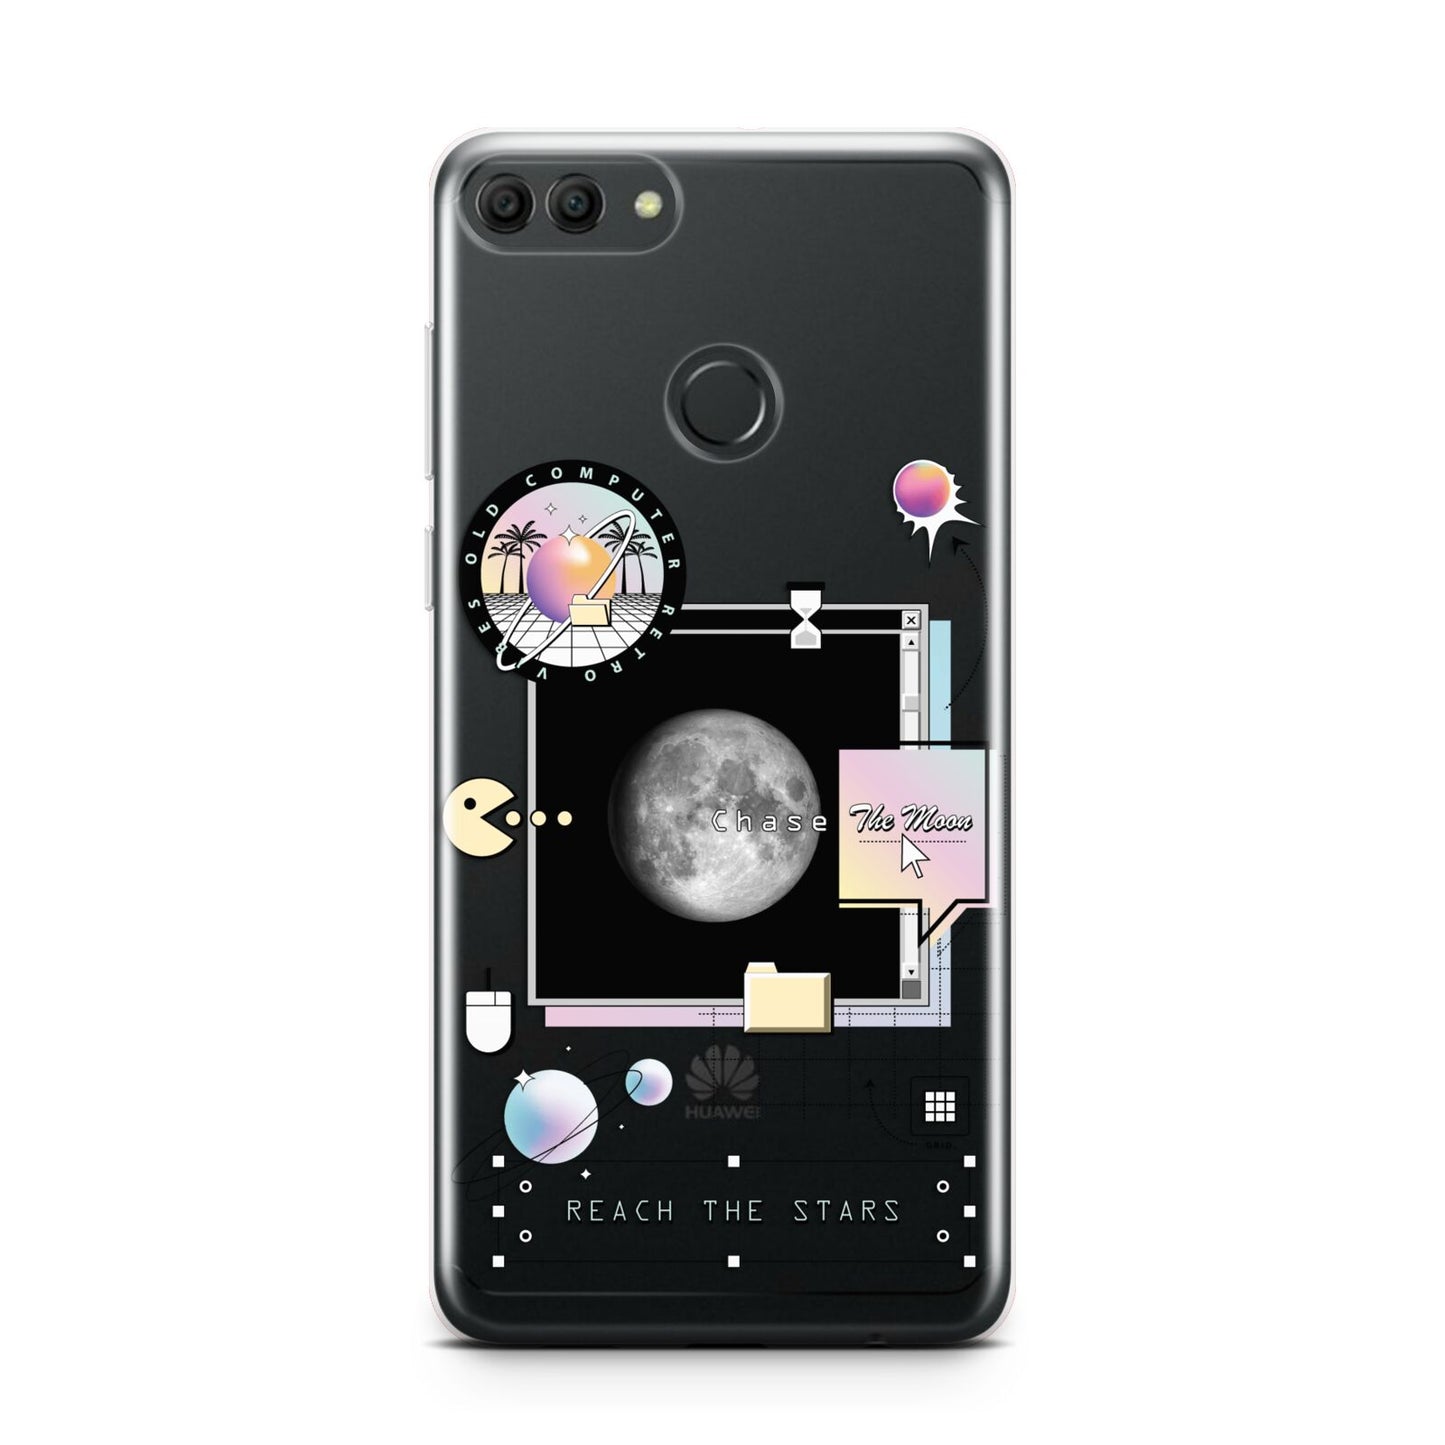 Chase The Moon Huawei Y9 2018